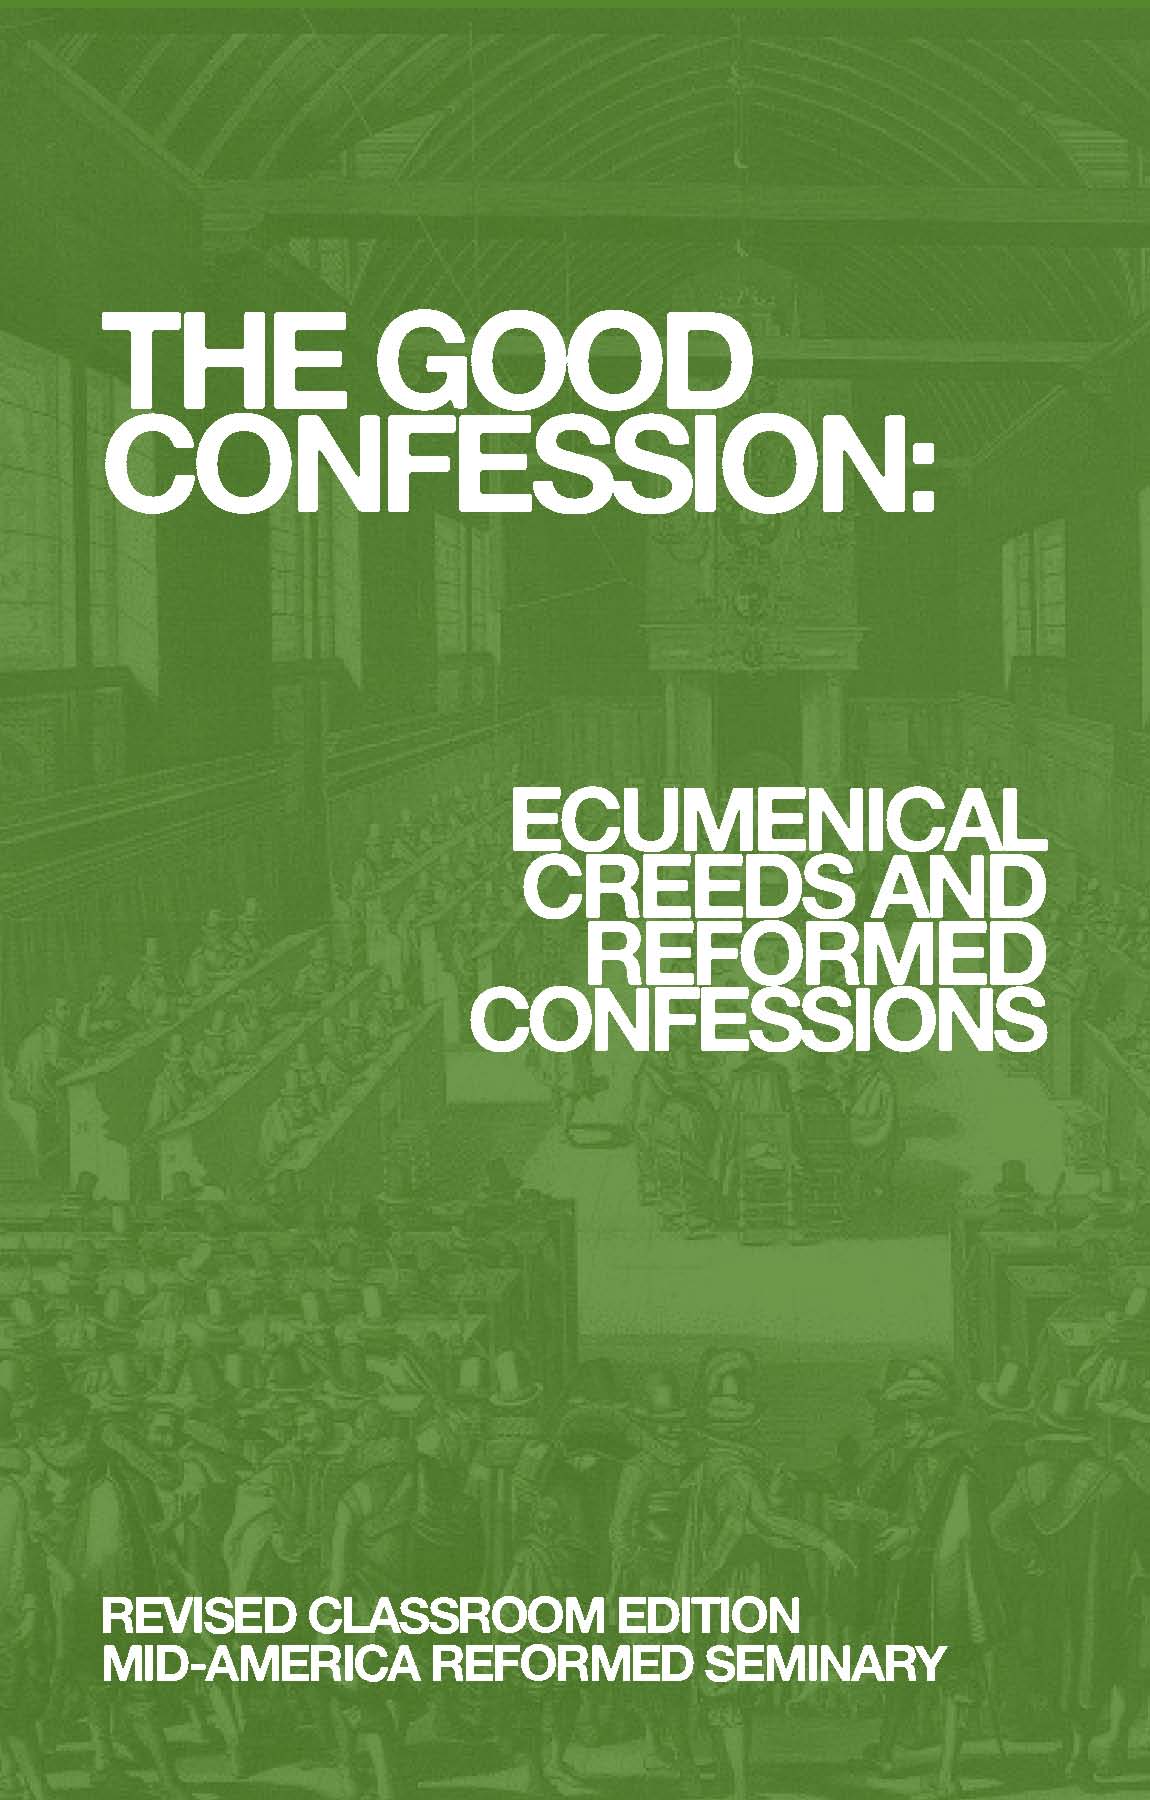 Ecumenical and Reformed Creeds and Confessions